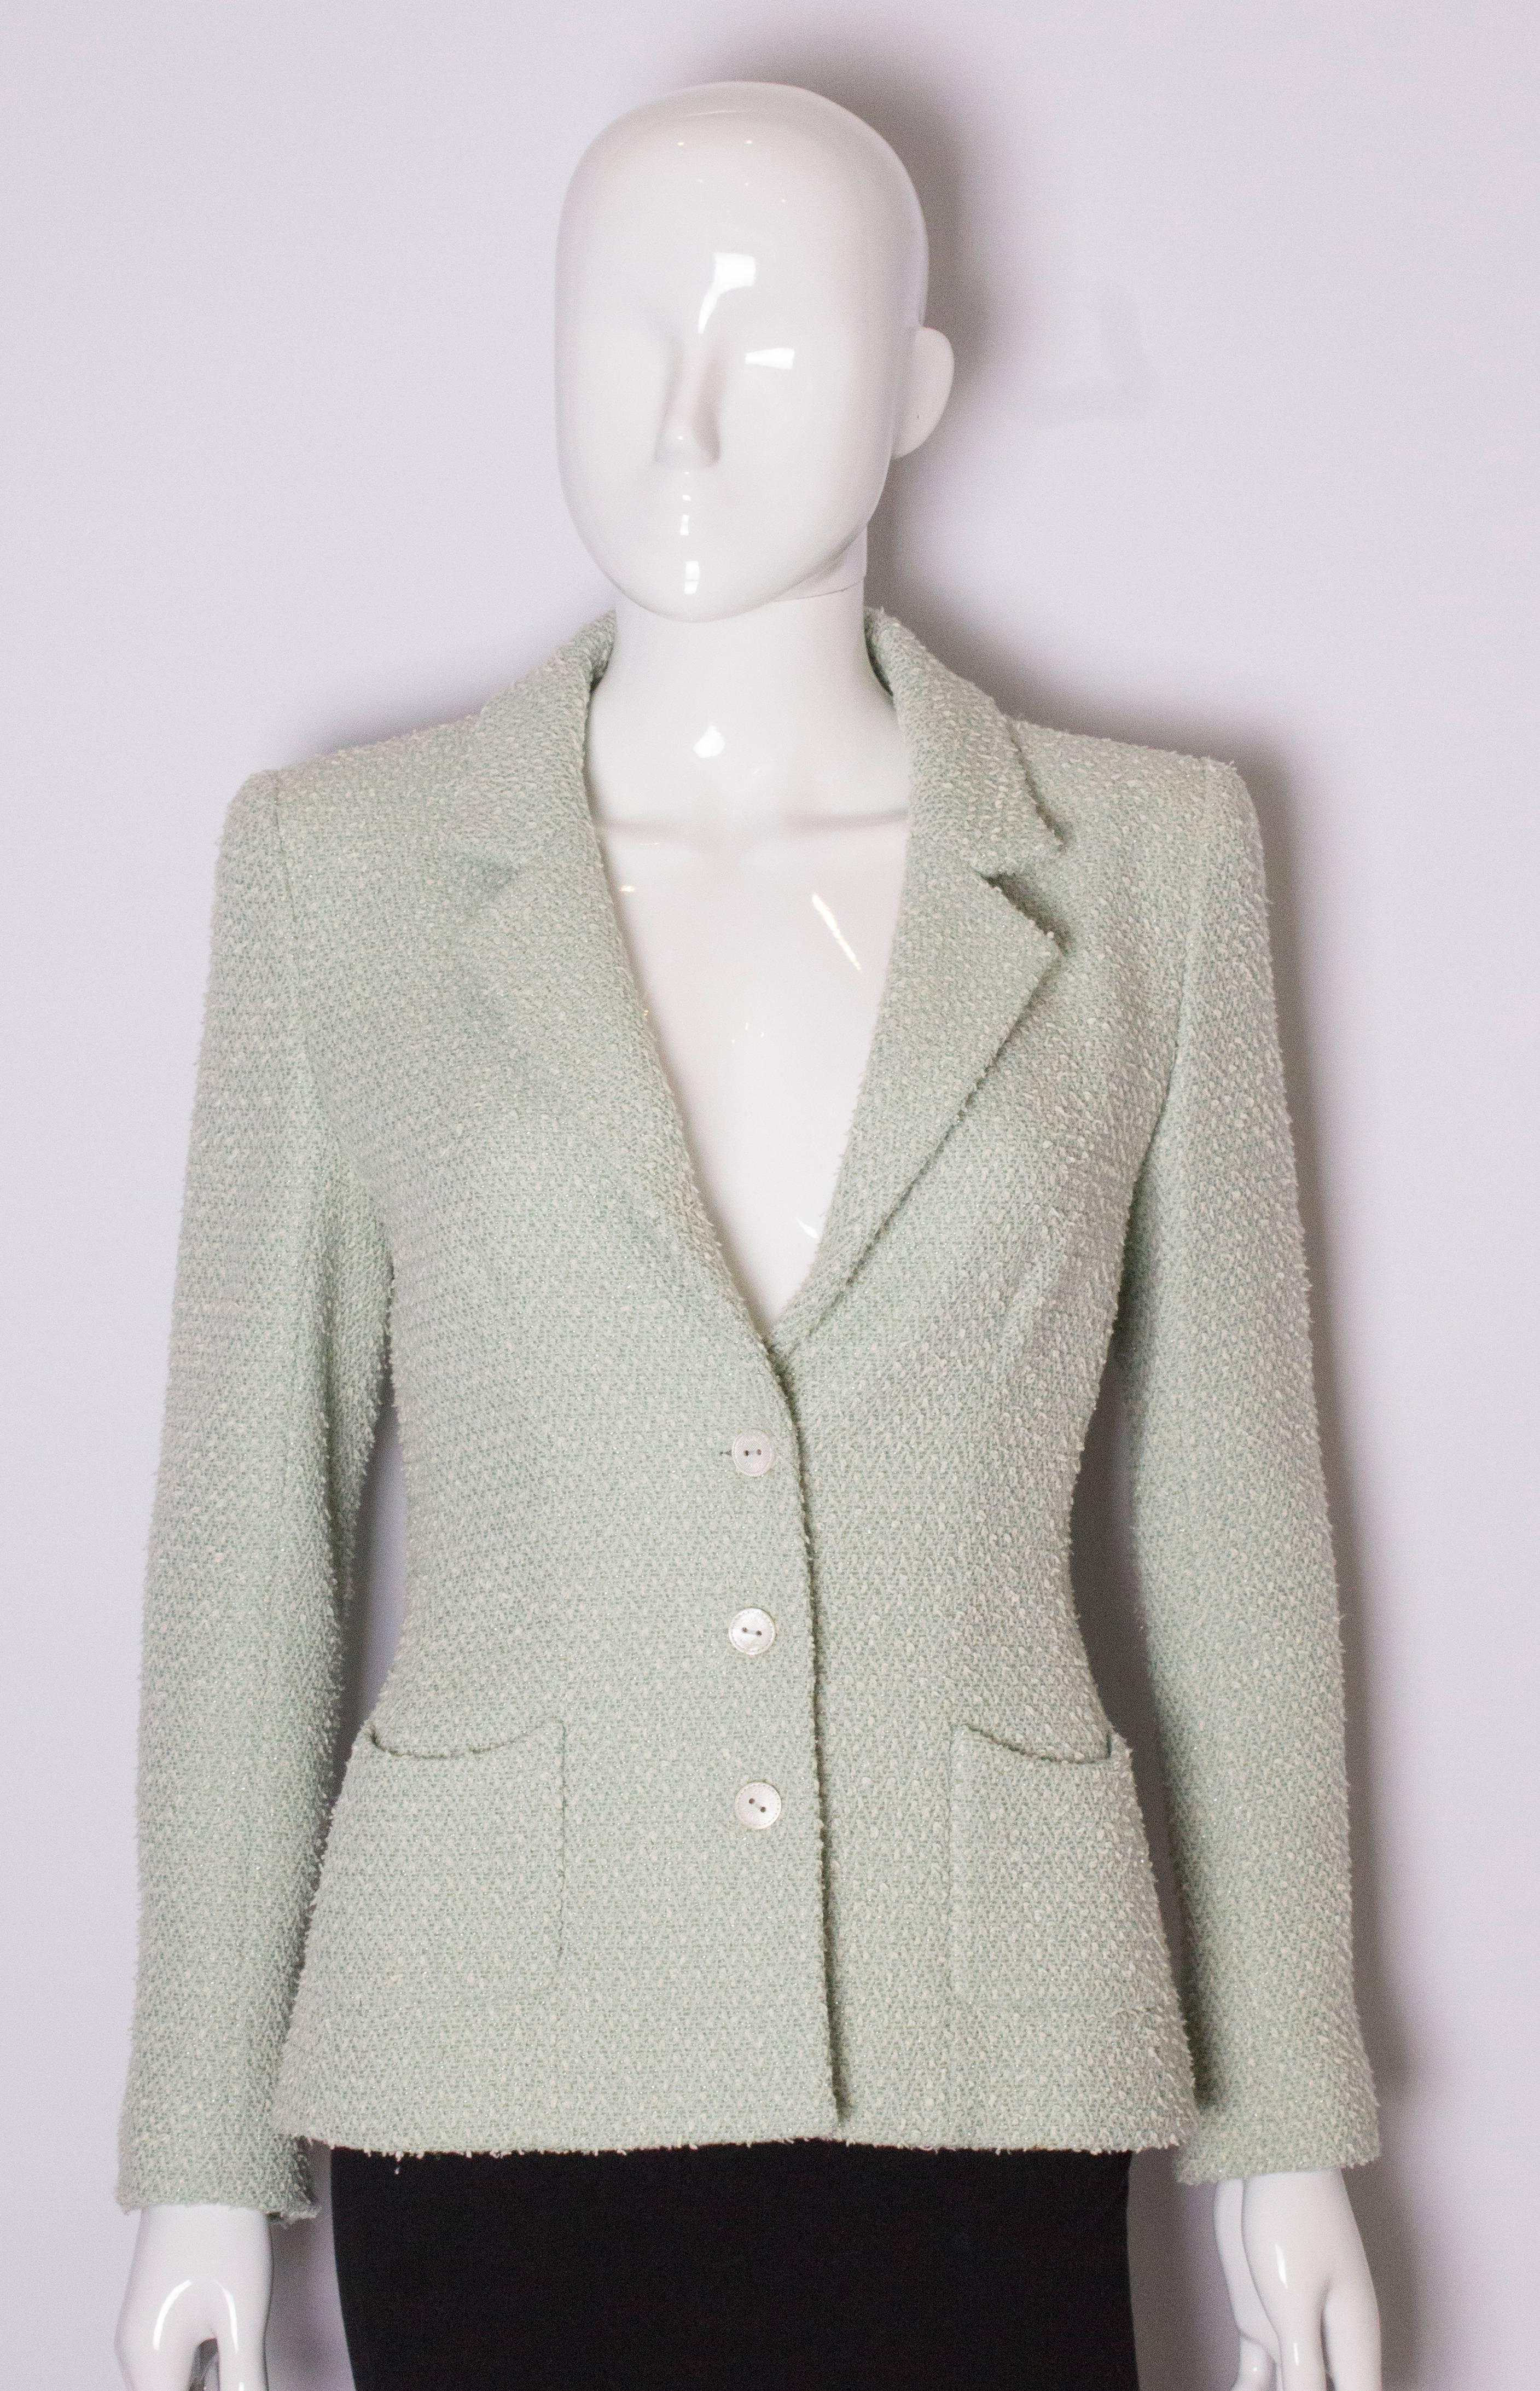 A pretty green jacket by Chanel.  The jacket is sage green with cream tuffs, and is a wool mix with silk lining. It has a v neckline and collar, 3 button front , single button cuffs and 2 pockets.
The jacket is lined in silk.